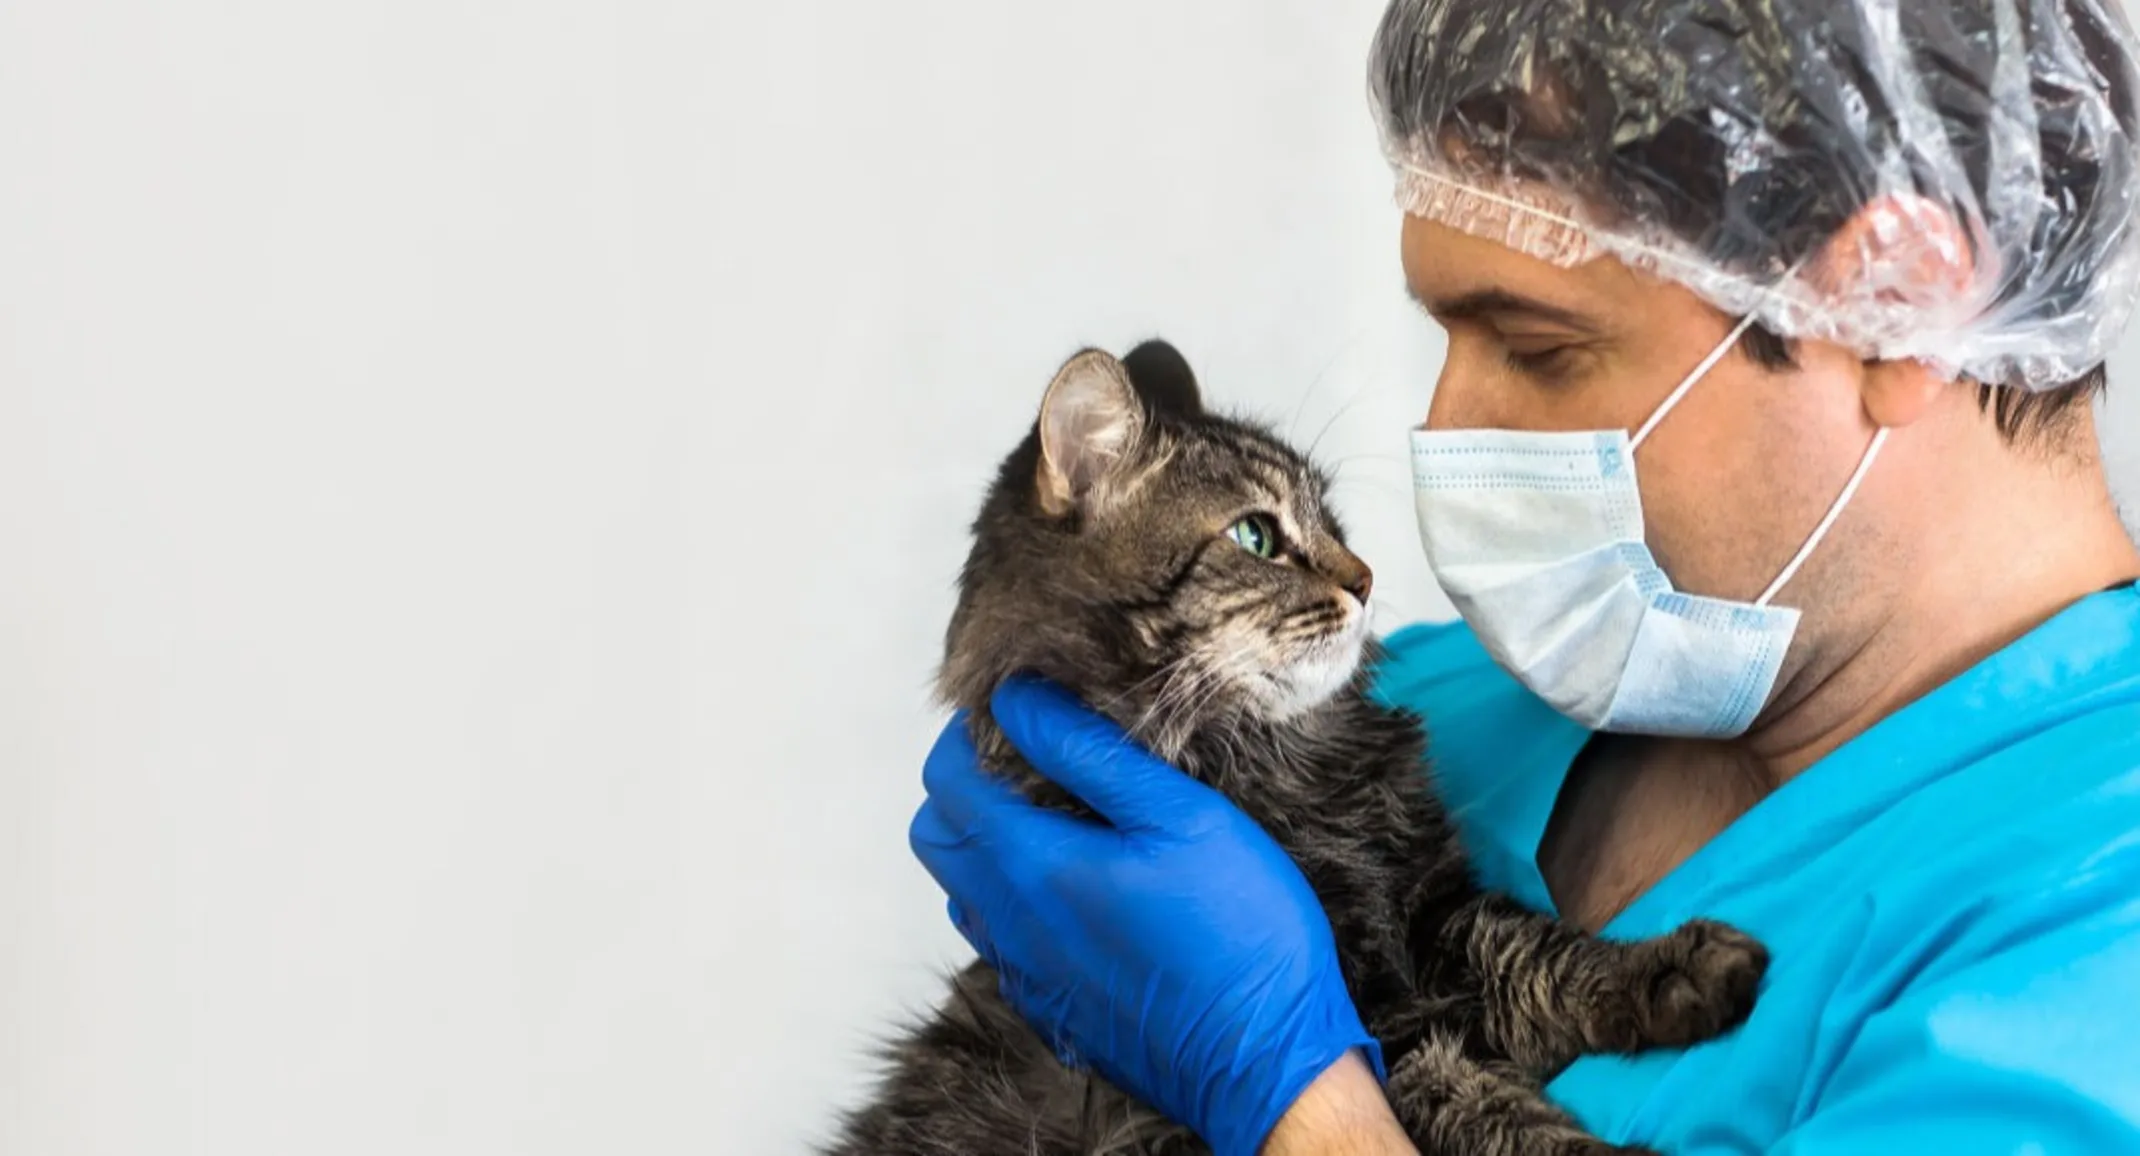 Doctor with mask holding cat